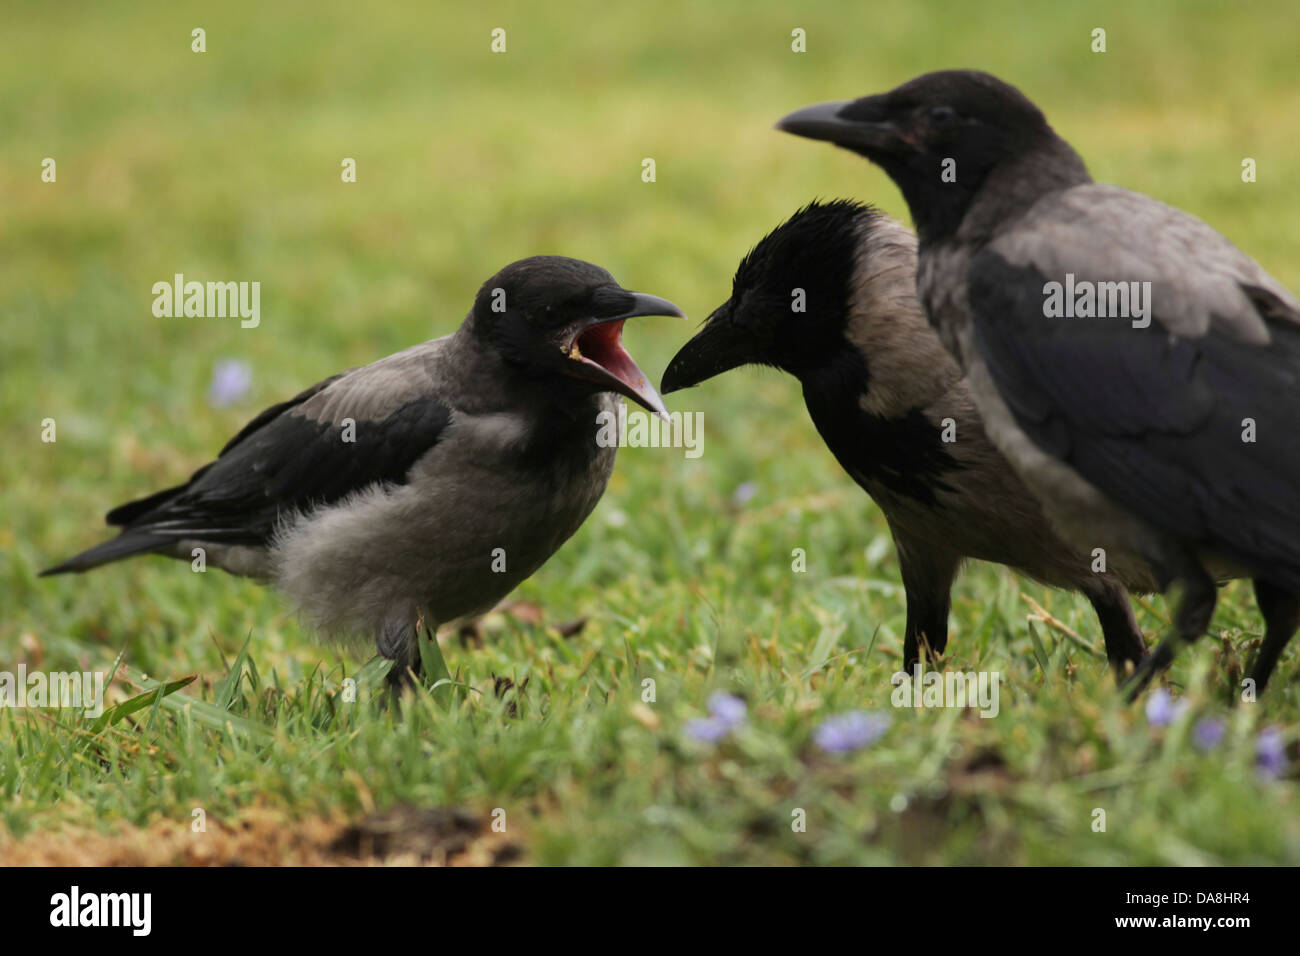 Three Hooded Crows (Corvus corone cornix) on the lawn Photographed in Israel in May Stock Photo